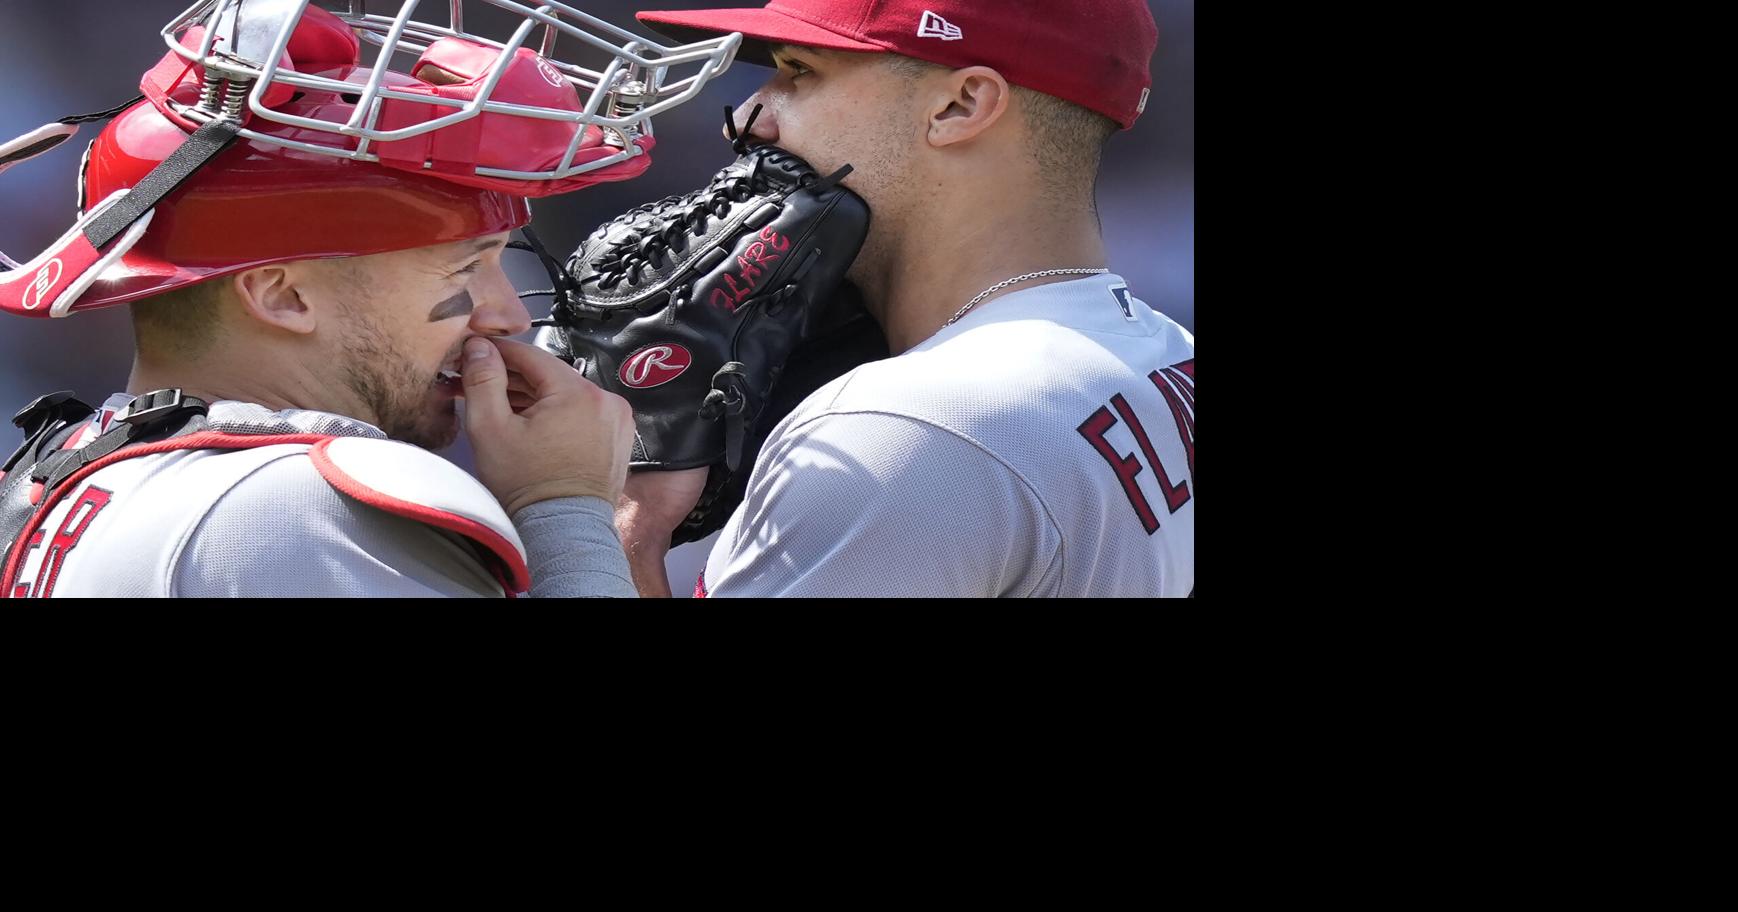 Coach Lisle - Jack Flaherty was adopted at 3 weeks old. He ended up being  raised by a single Mother. He wanted to quit baseball his Freshman year.  His Mom told him